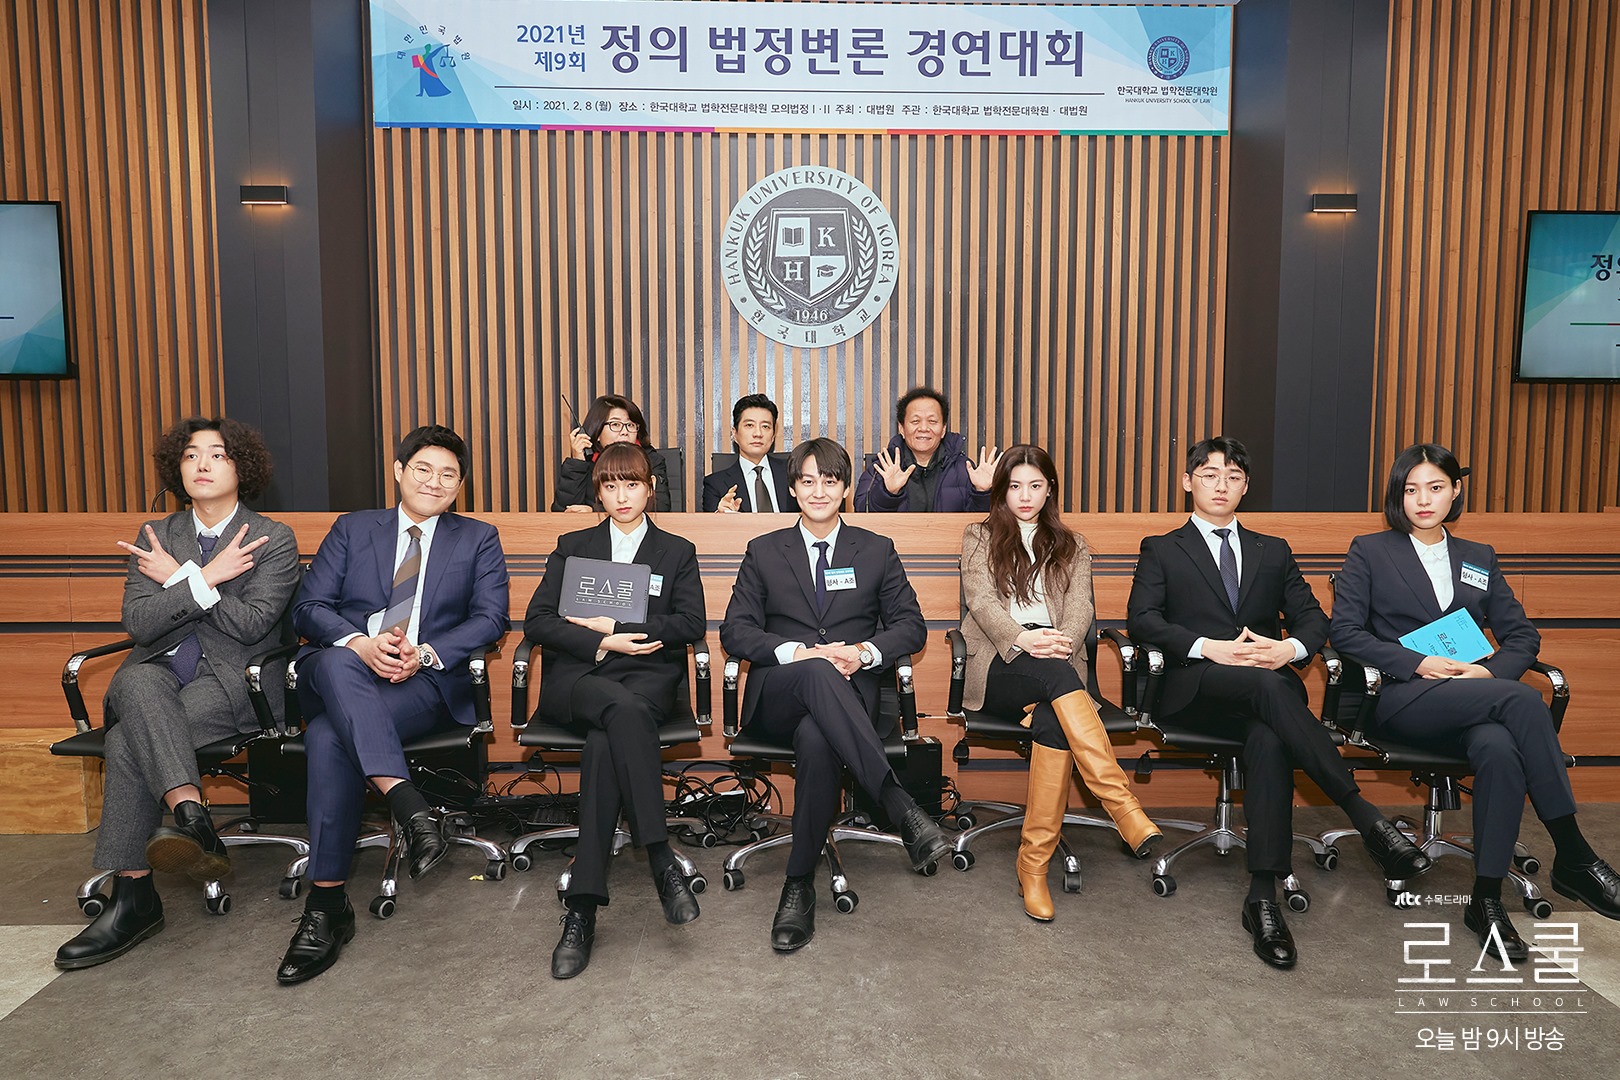 K-Drama Review: "Law School" Serves Fascinating Courtroom Story To Its Targeted Audience - kdramadiary